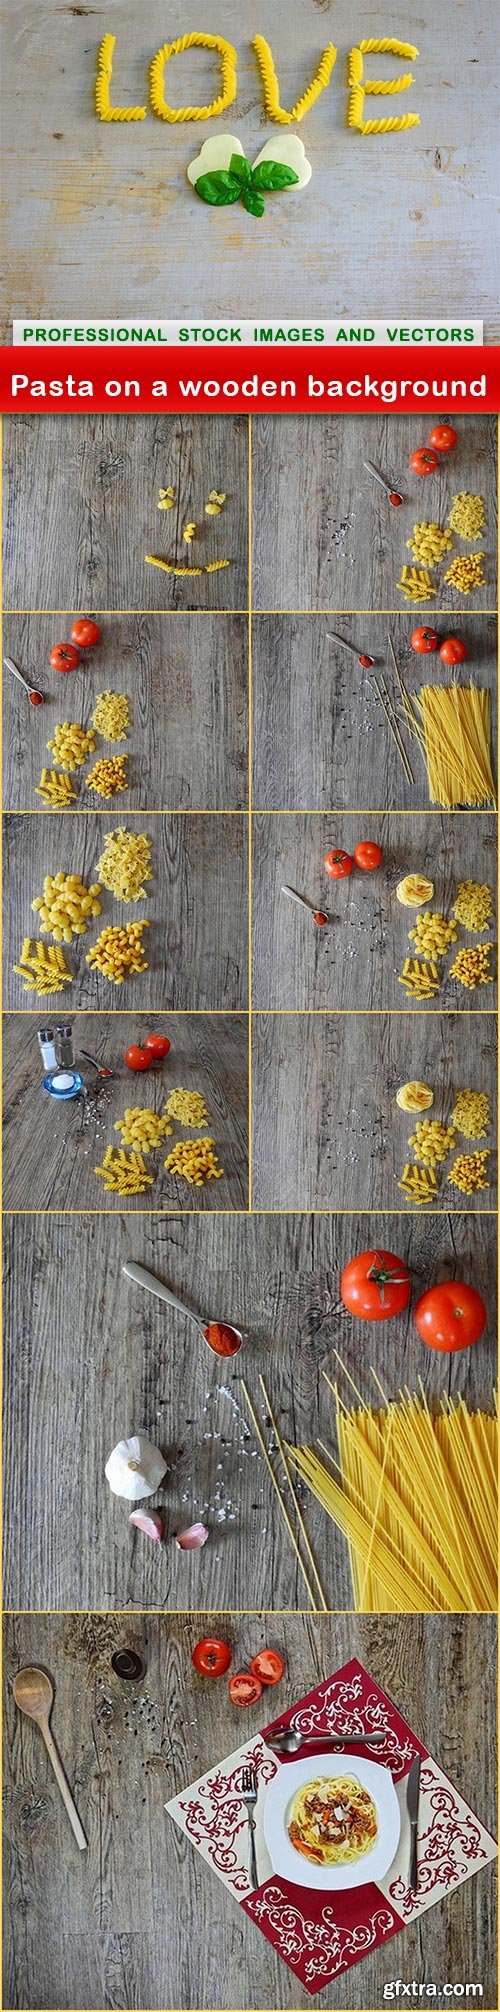 Pasta on a wooden background - 11 UHQ JPEG